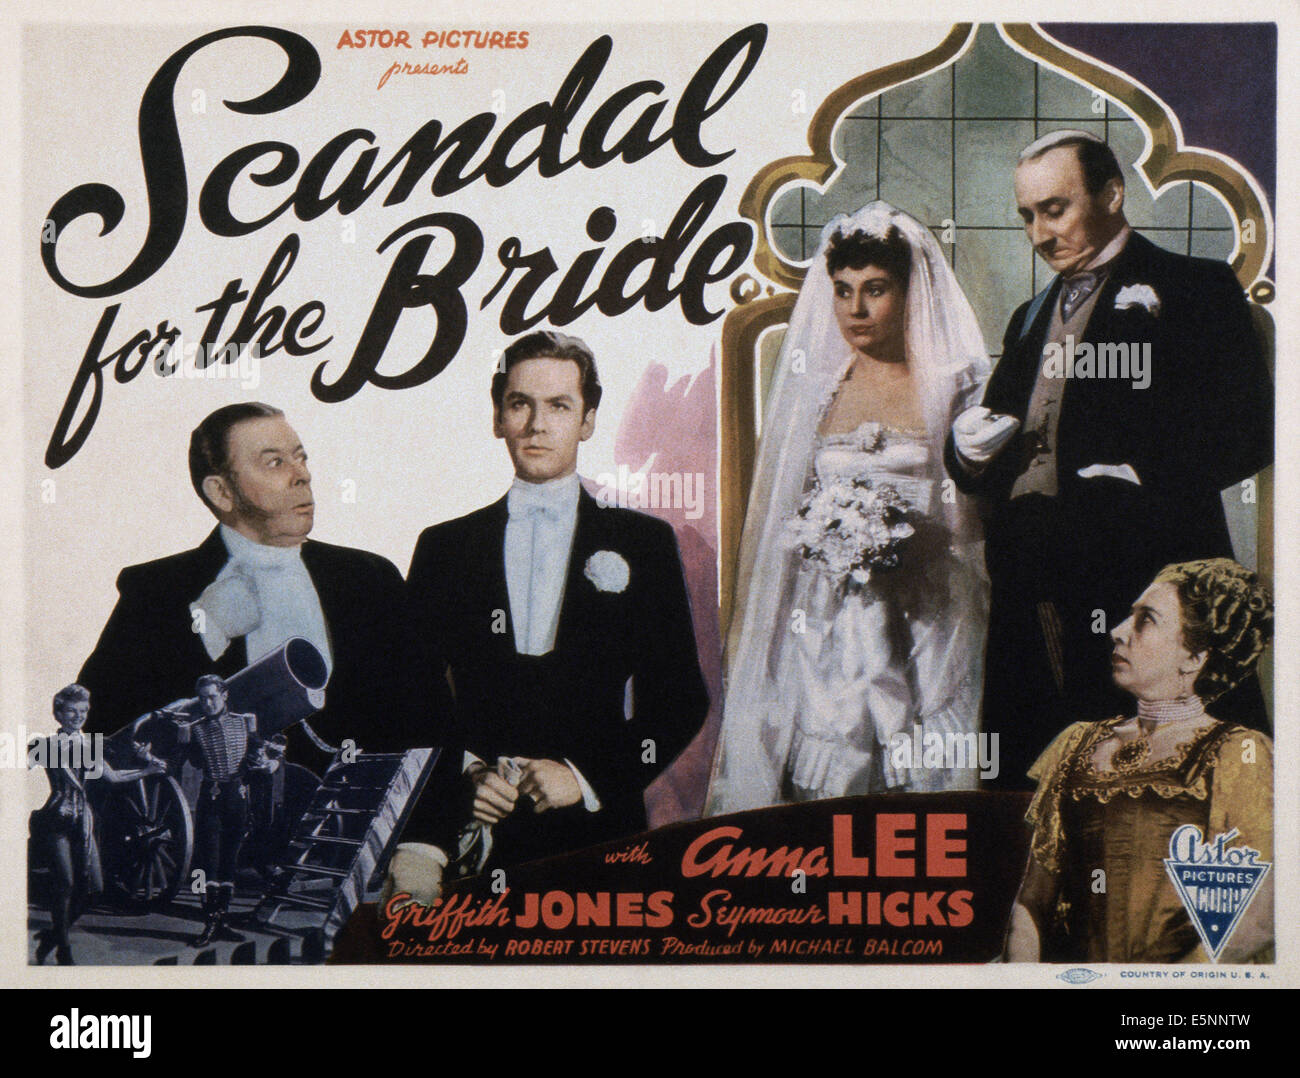 SCANDAL FOR THE BRIDE, US lobbycard, Seymour Hicks (left), Griffith Jones (second left), 1943 Stock Photo